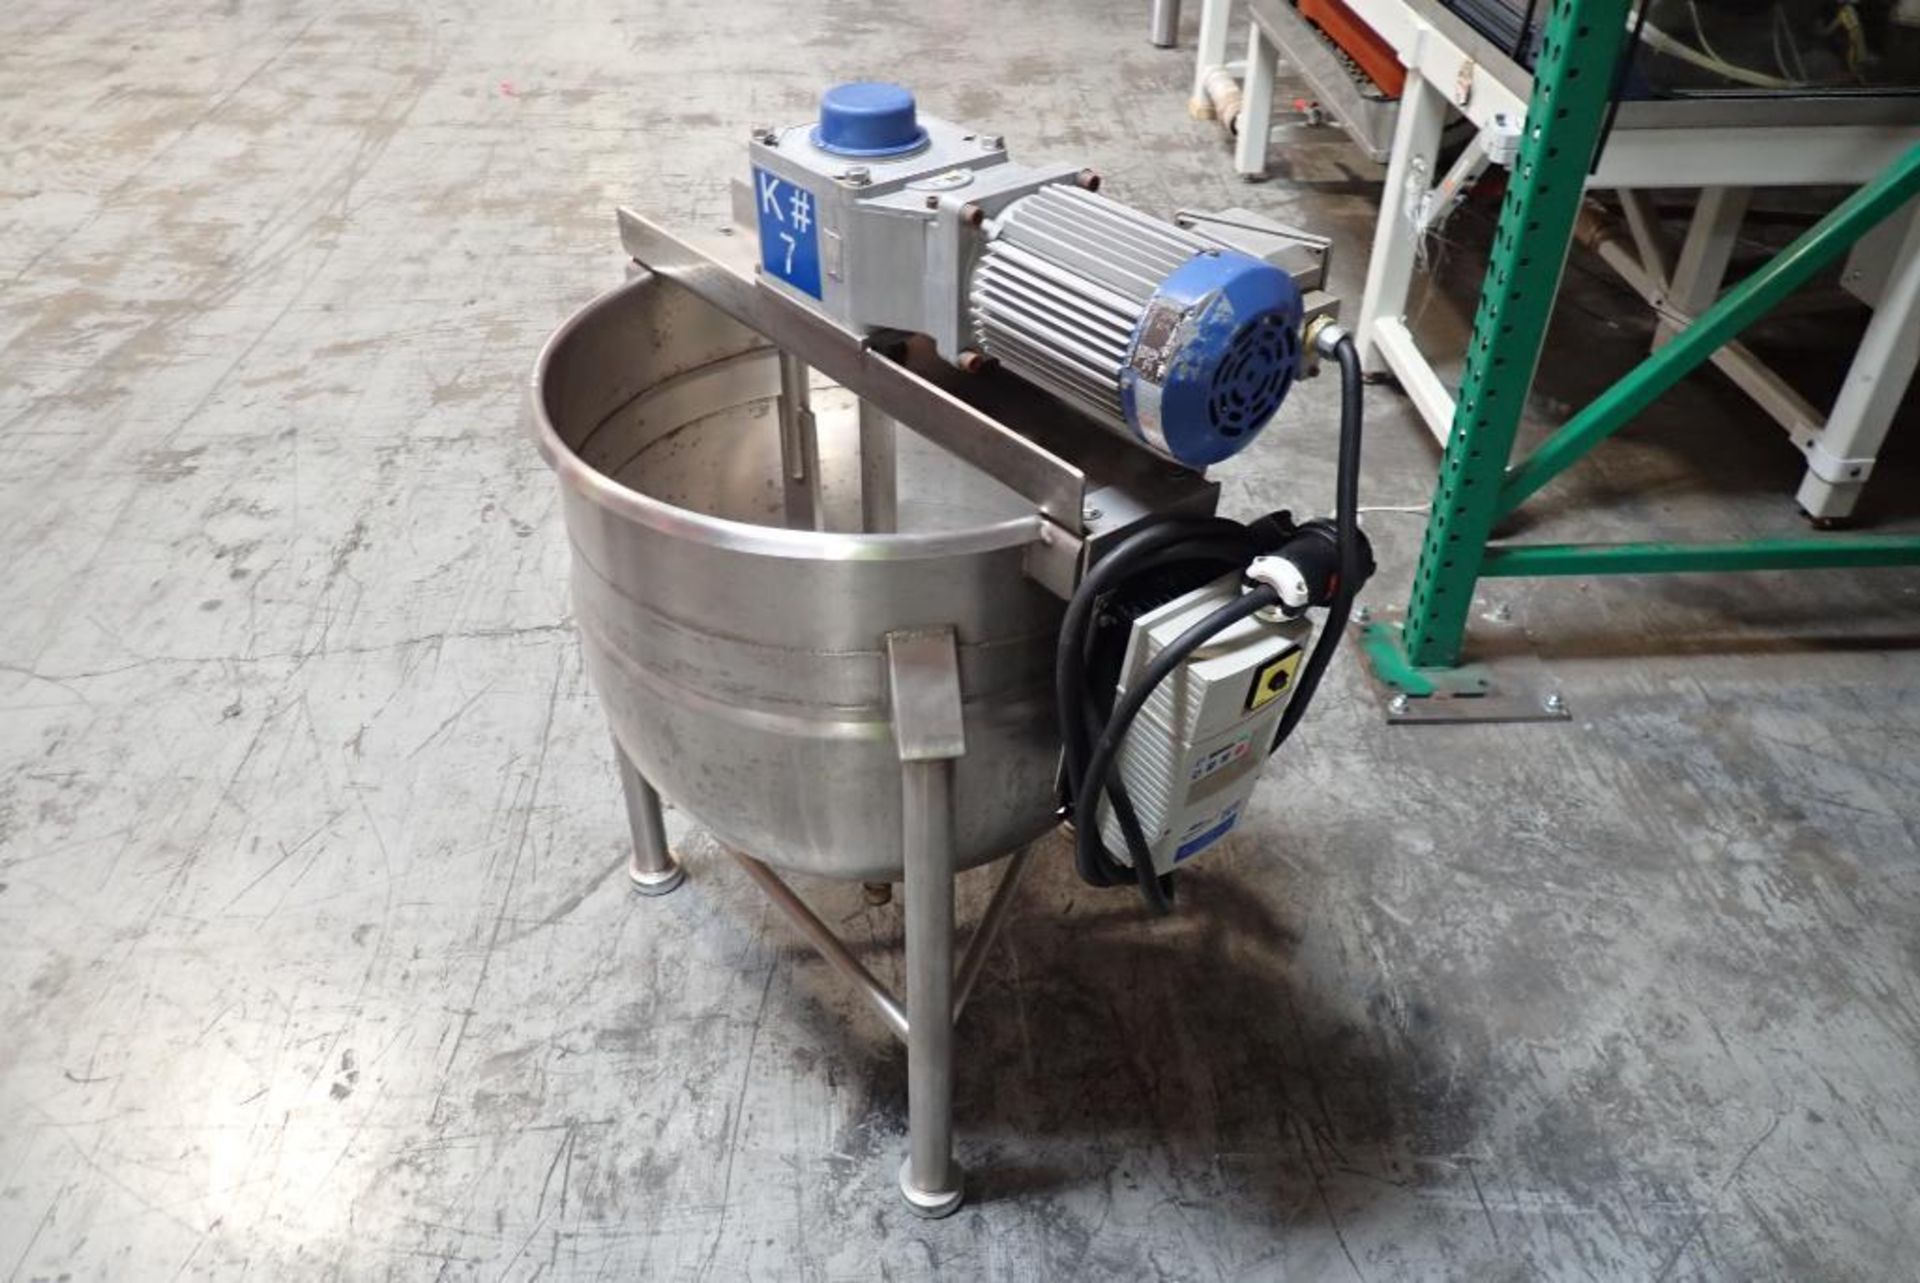 SS 1/2 jacketed kettle with top agitation